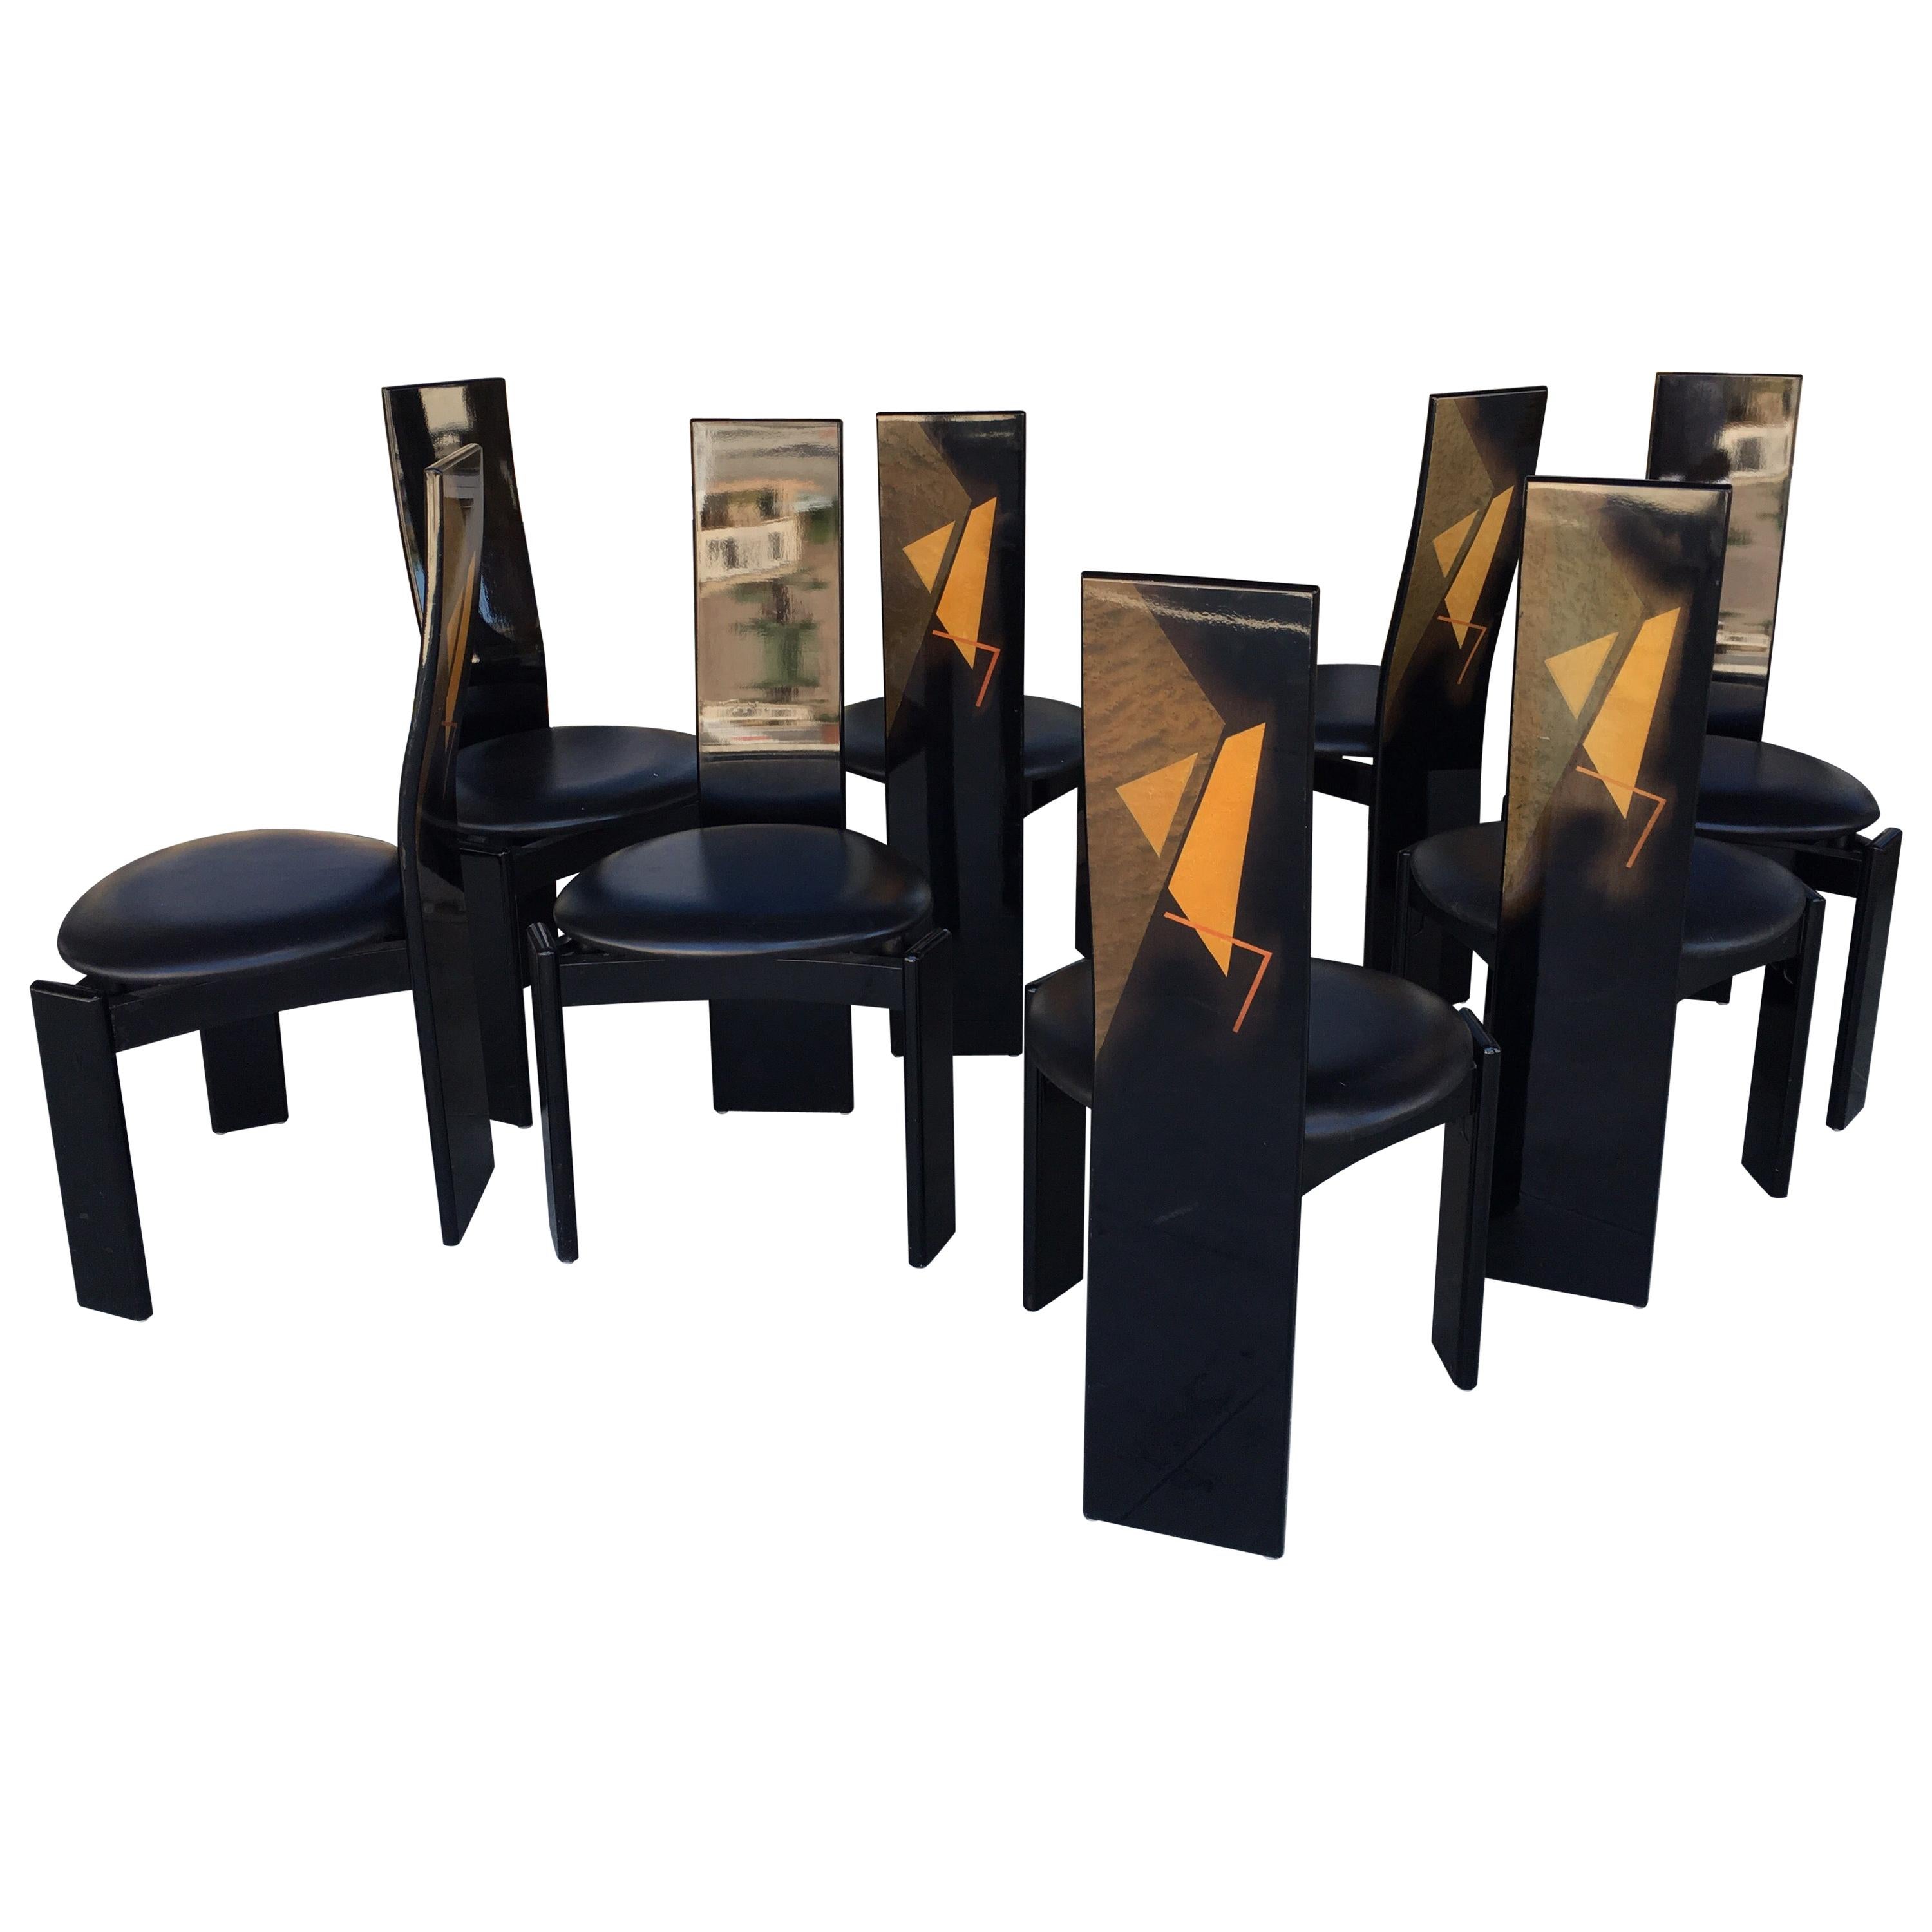 Set of 8 Italian Post Modern Design Dining Chairs by Pietro Costantini